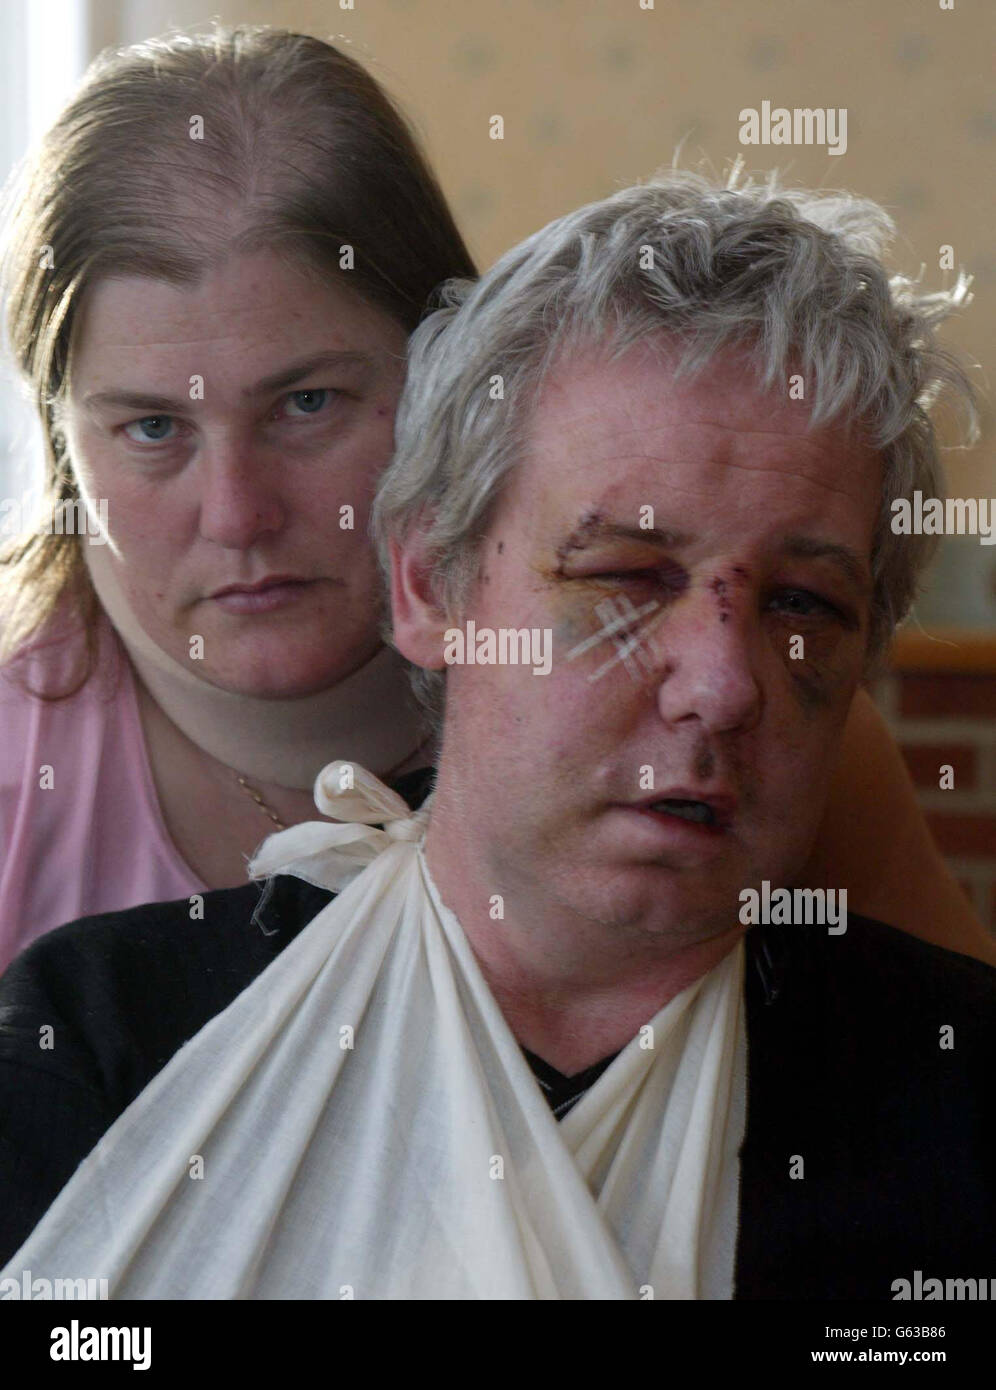 John and Denise Dawes from Middlesbrough who were battered by by teenage thugs wielding bottles, a golf club and a chair leg in an attack as they tried to stop them stealing there car from outside their home. *...The couple had confronted four youths who they believed had tried to steal their car when six more youths appeared and attacked them. Securicor van driver John Dawes was left lying in the street with severe facial injuries, drifting in and out of consciousness. Denise Dawes, 40, who had clumps of her hair ripped out, has told how she faces an anxious wait for the results of hepatitis Stock Photo